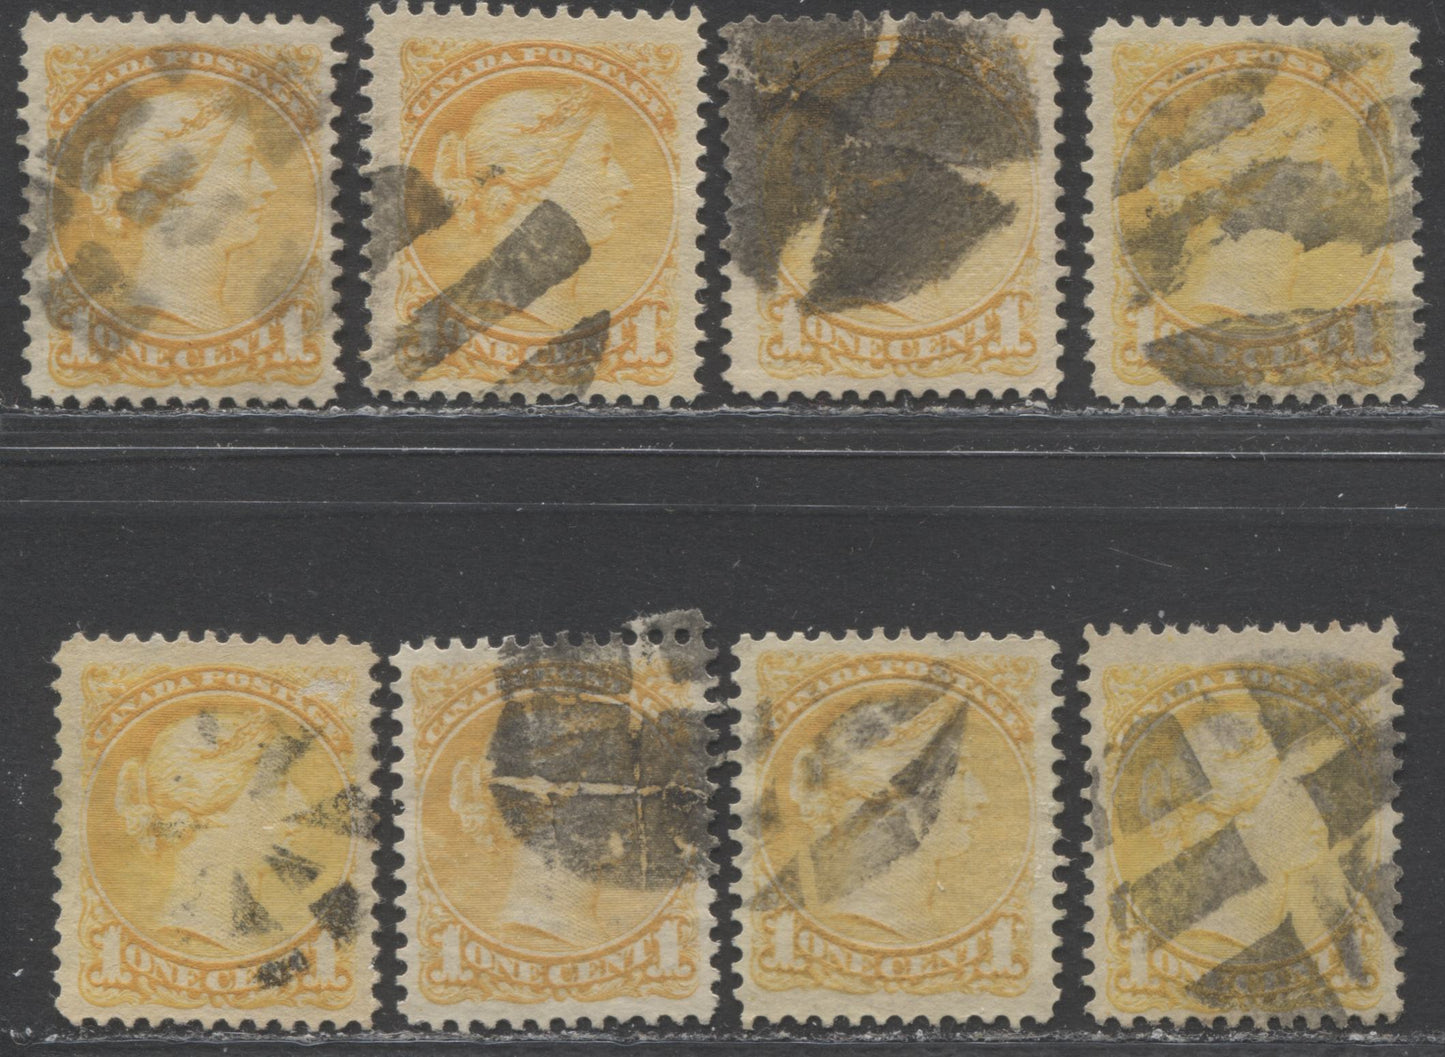 Lot 83 Canada #35, 35i 1c Lemon Yellow and Yellow Queen Victoria, 1870-1897 Small Queen Issue, Eight Fine and VF Used Examples Montreal and Second Ottawa, Various Perfs, Soft Horizontal and Stout Horizontal Wove, All With Clear Segmented Cork Cancels